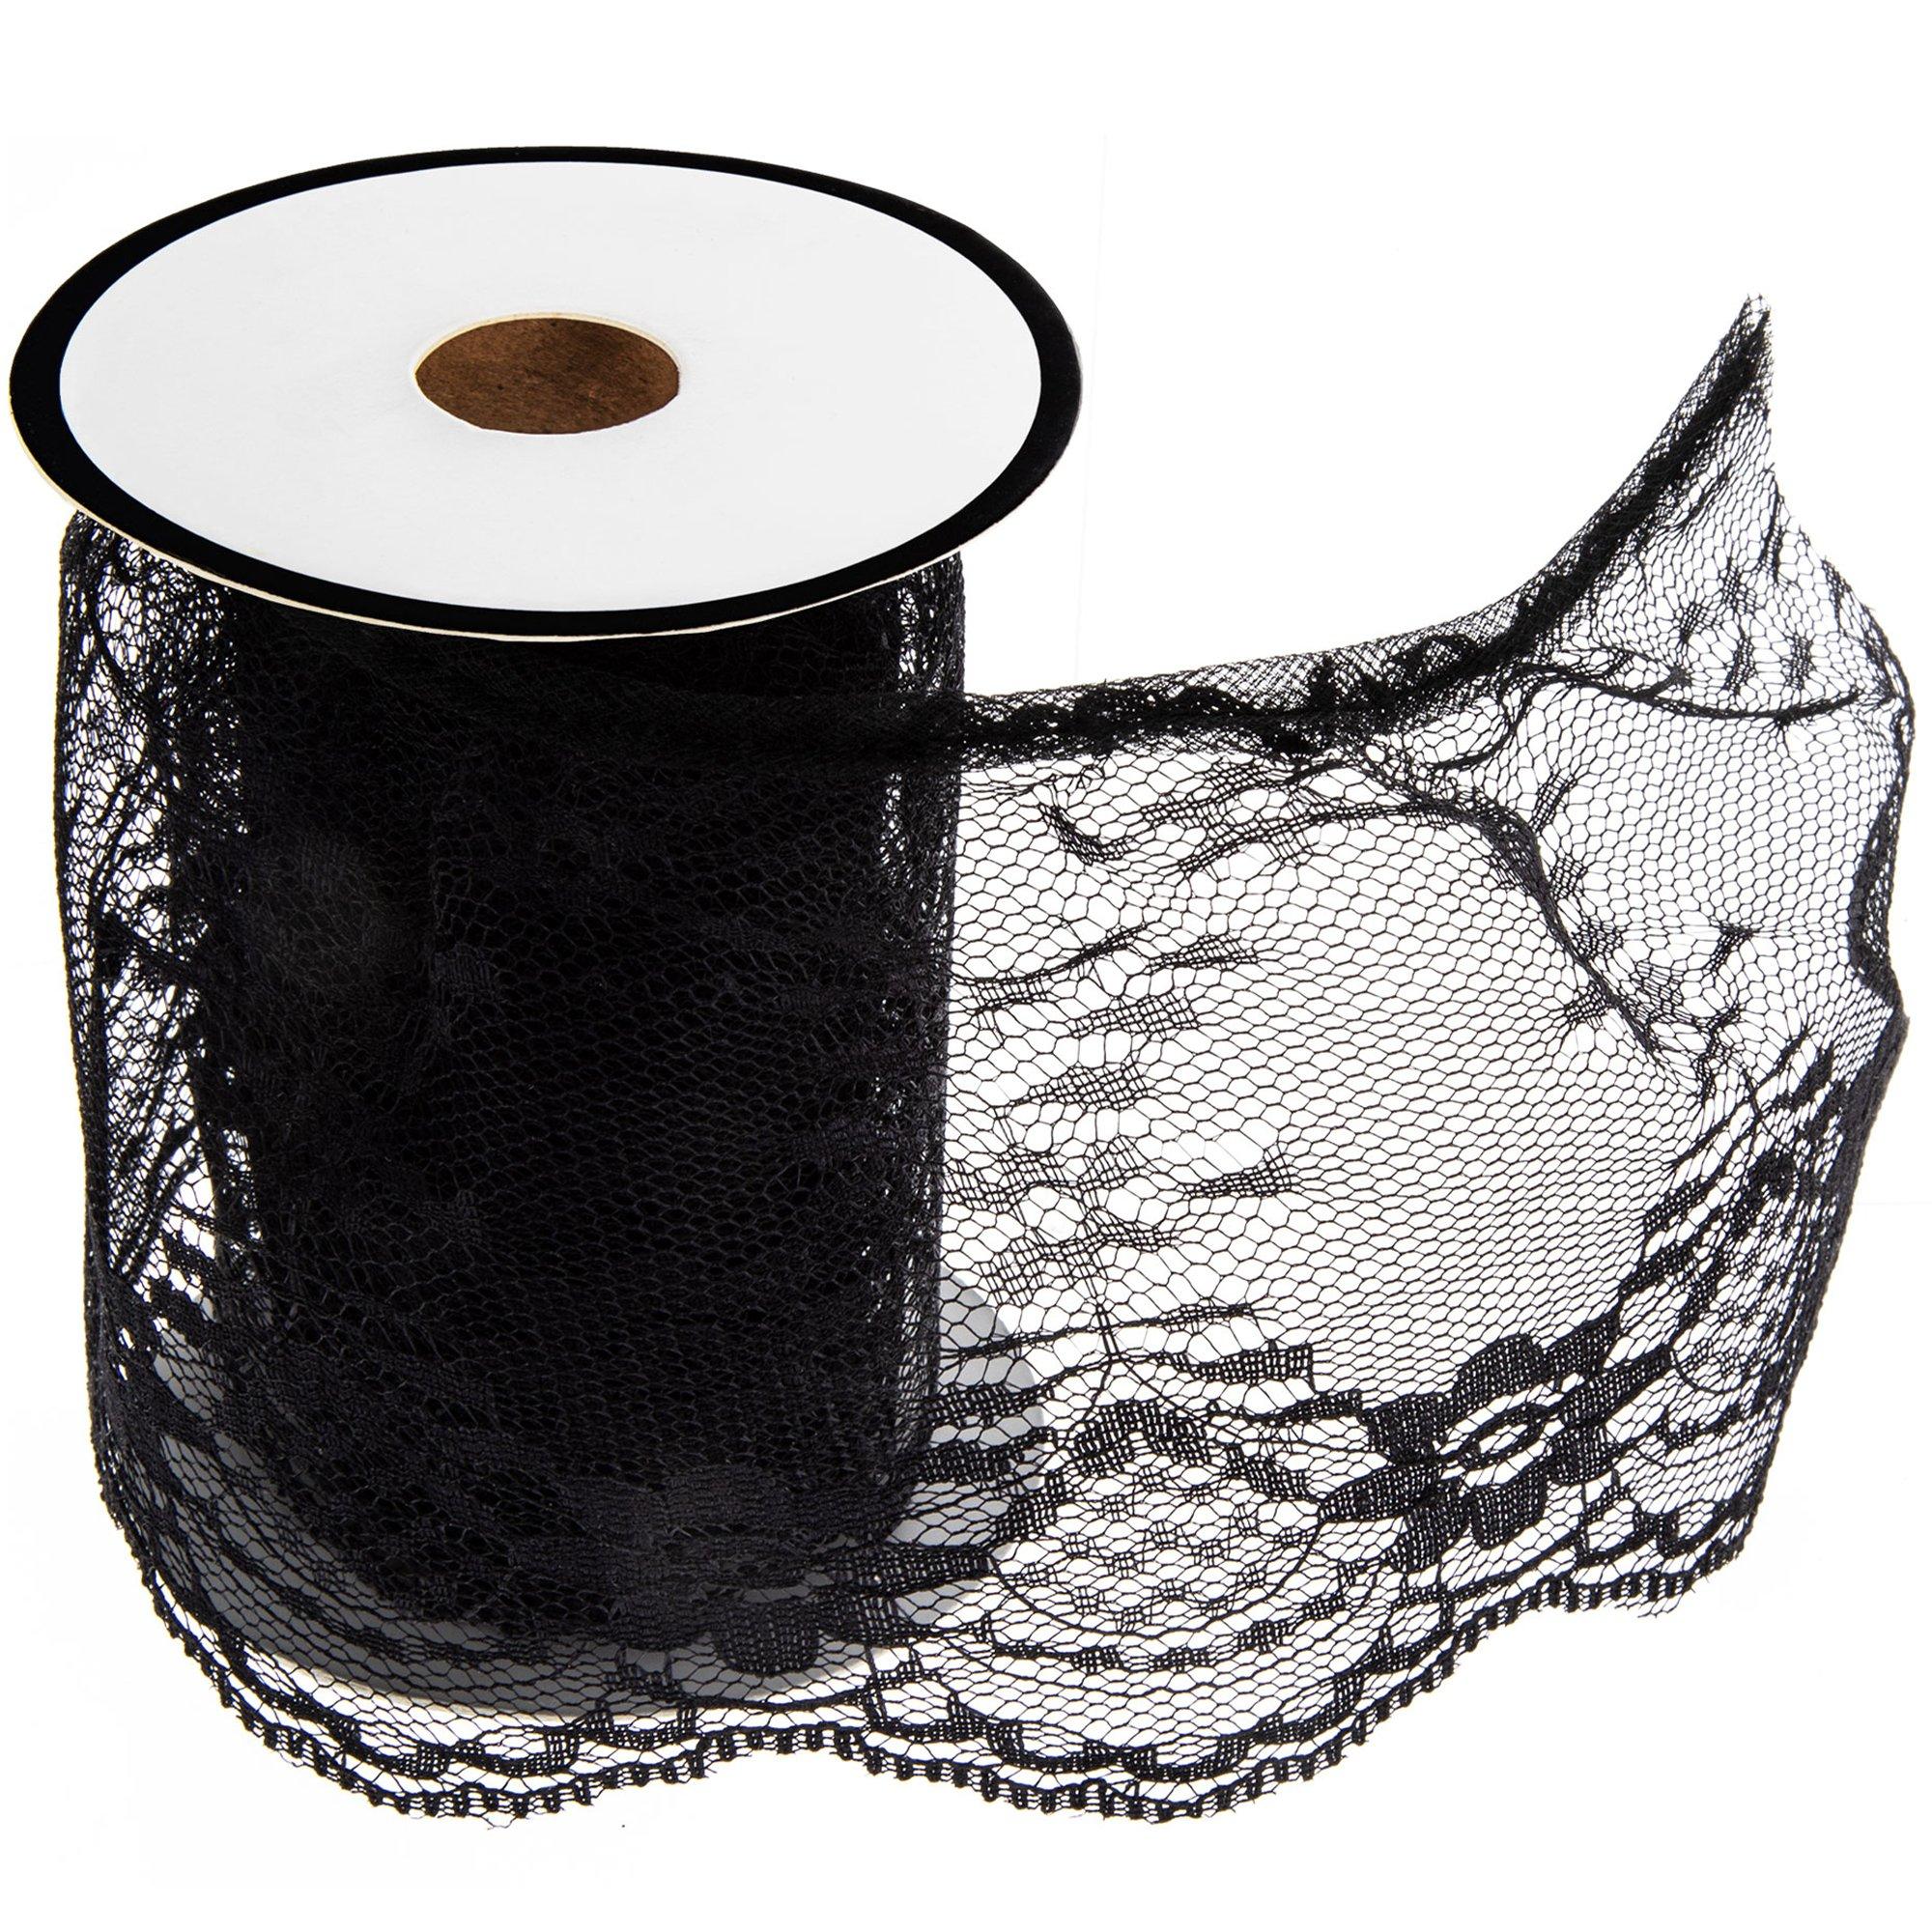 Fancy Insertion Lace with Ribbon 2 1/4 (57mm) Black Per Yard